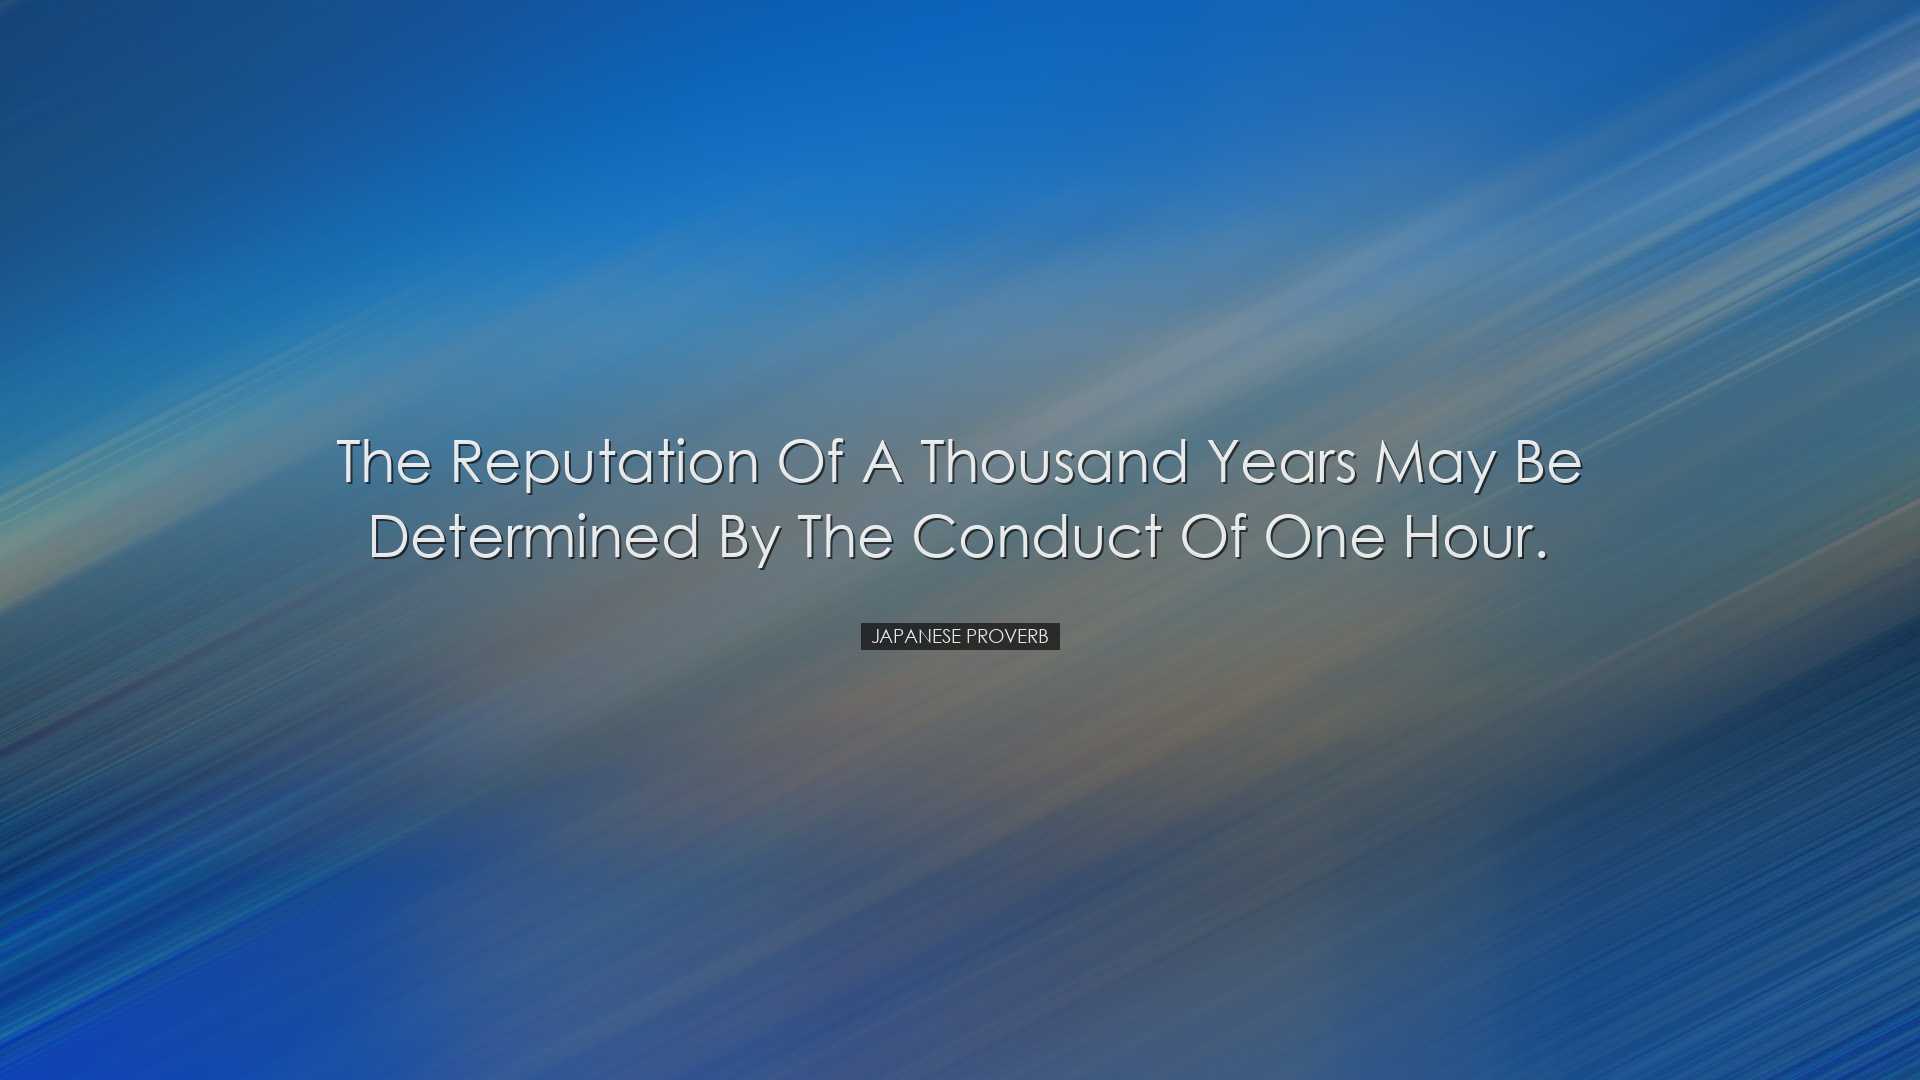 The reputation of a thousand years may be determined by the conduc